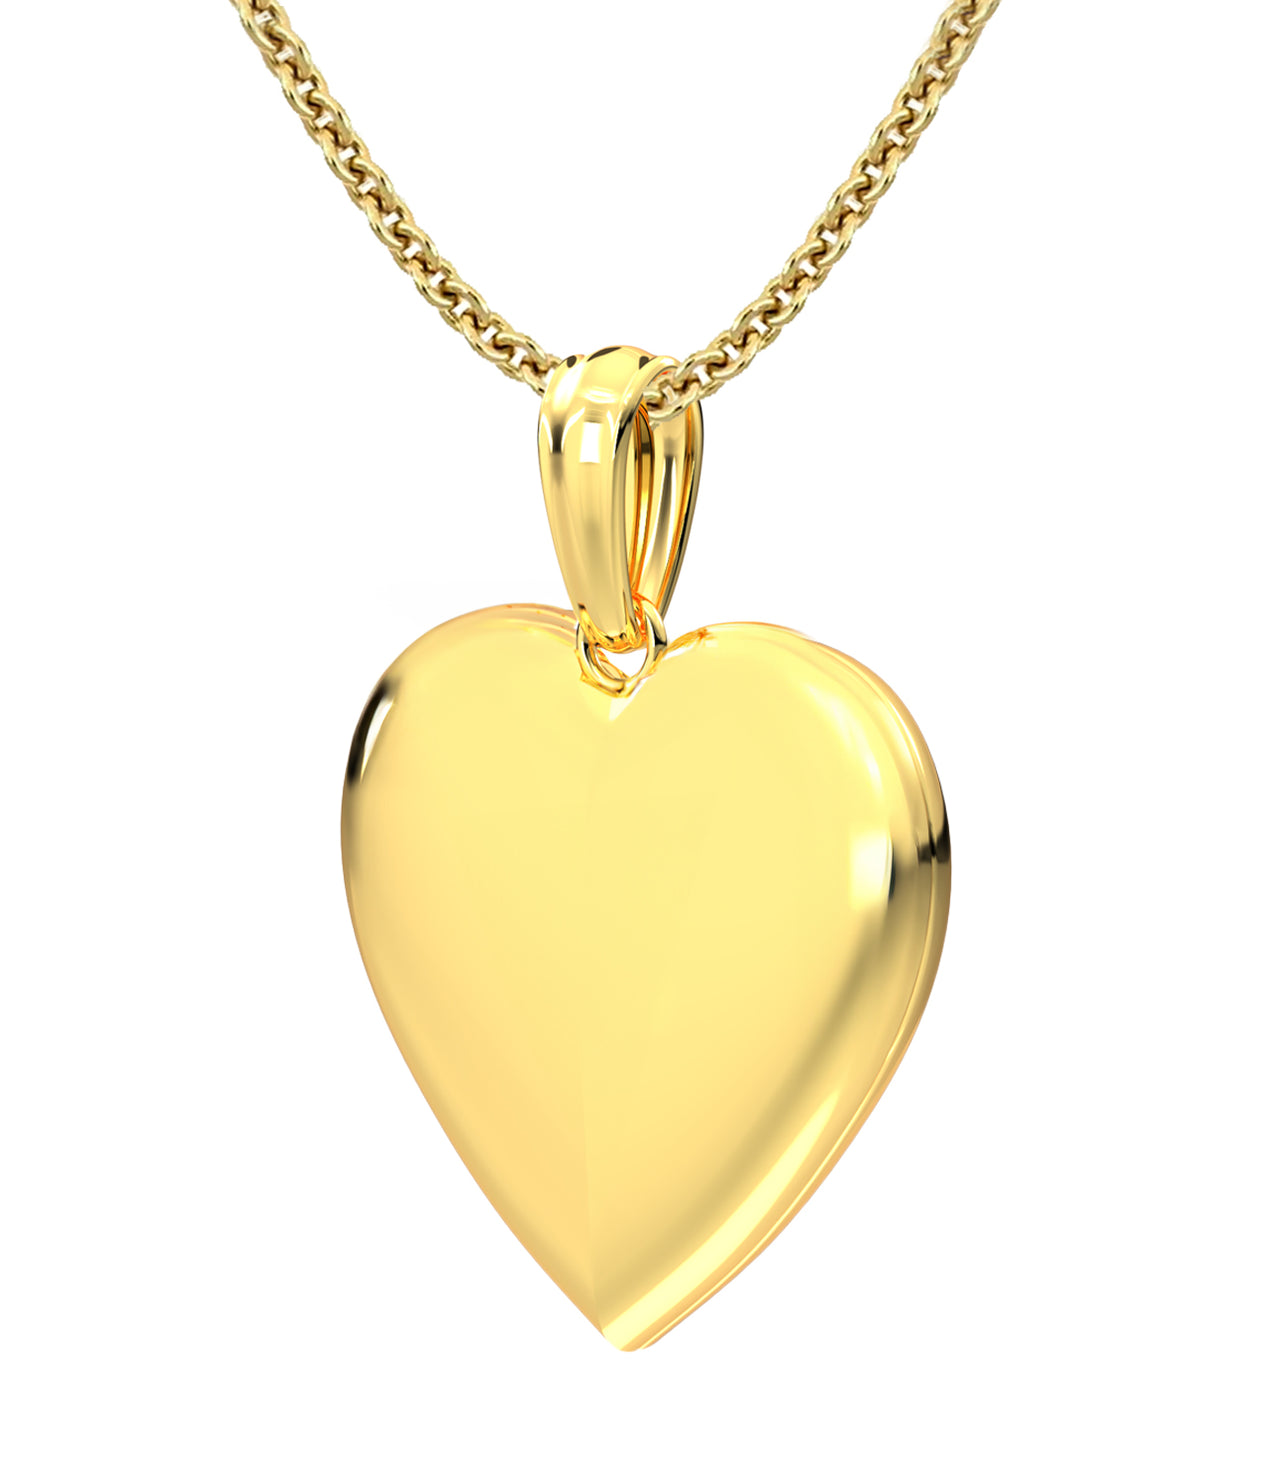 Engravable Personalized Ladies 14k Yellow Gold Polished Heart 2 Photo Locket Pendant Necklace, 20mm